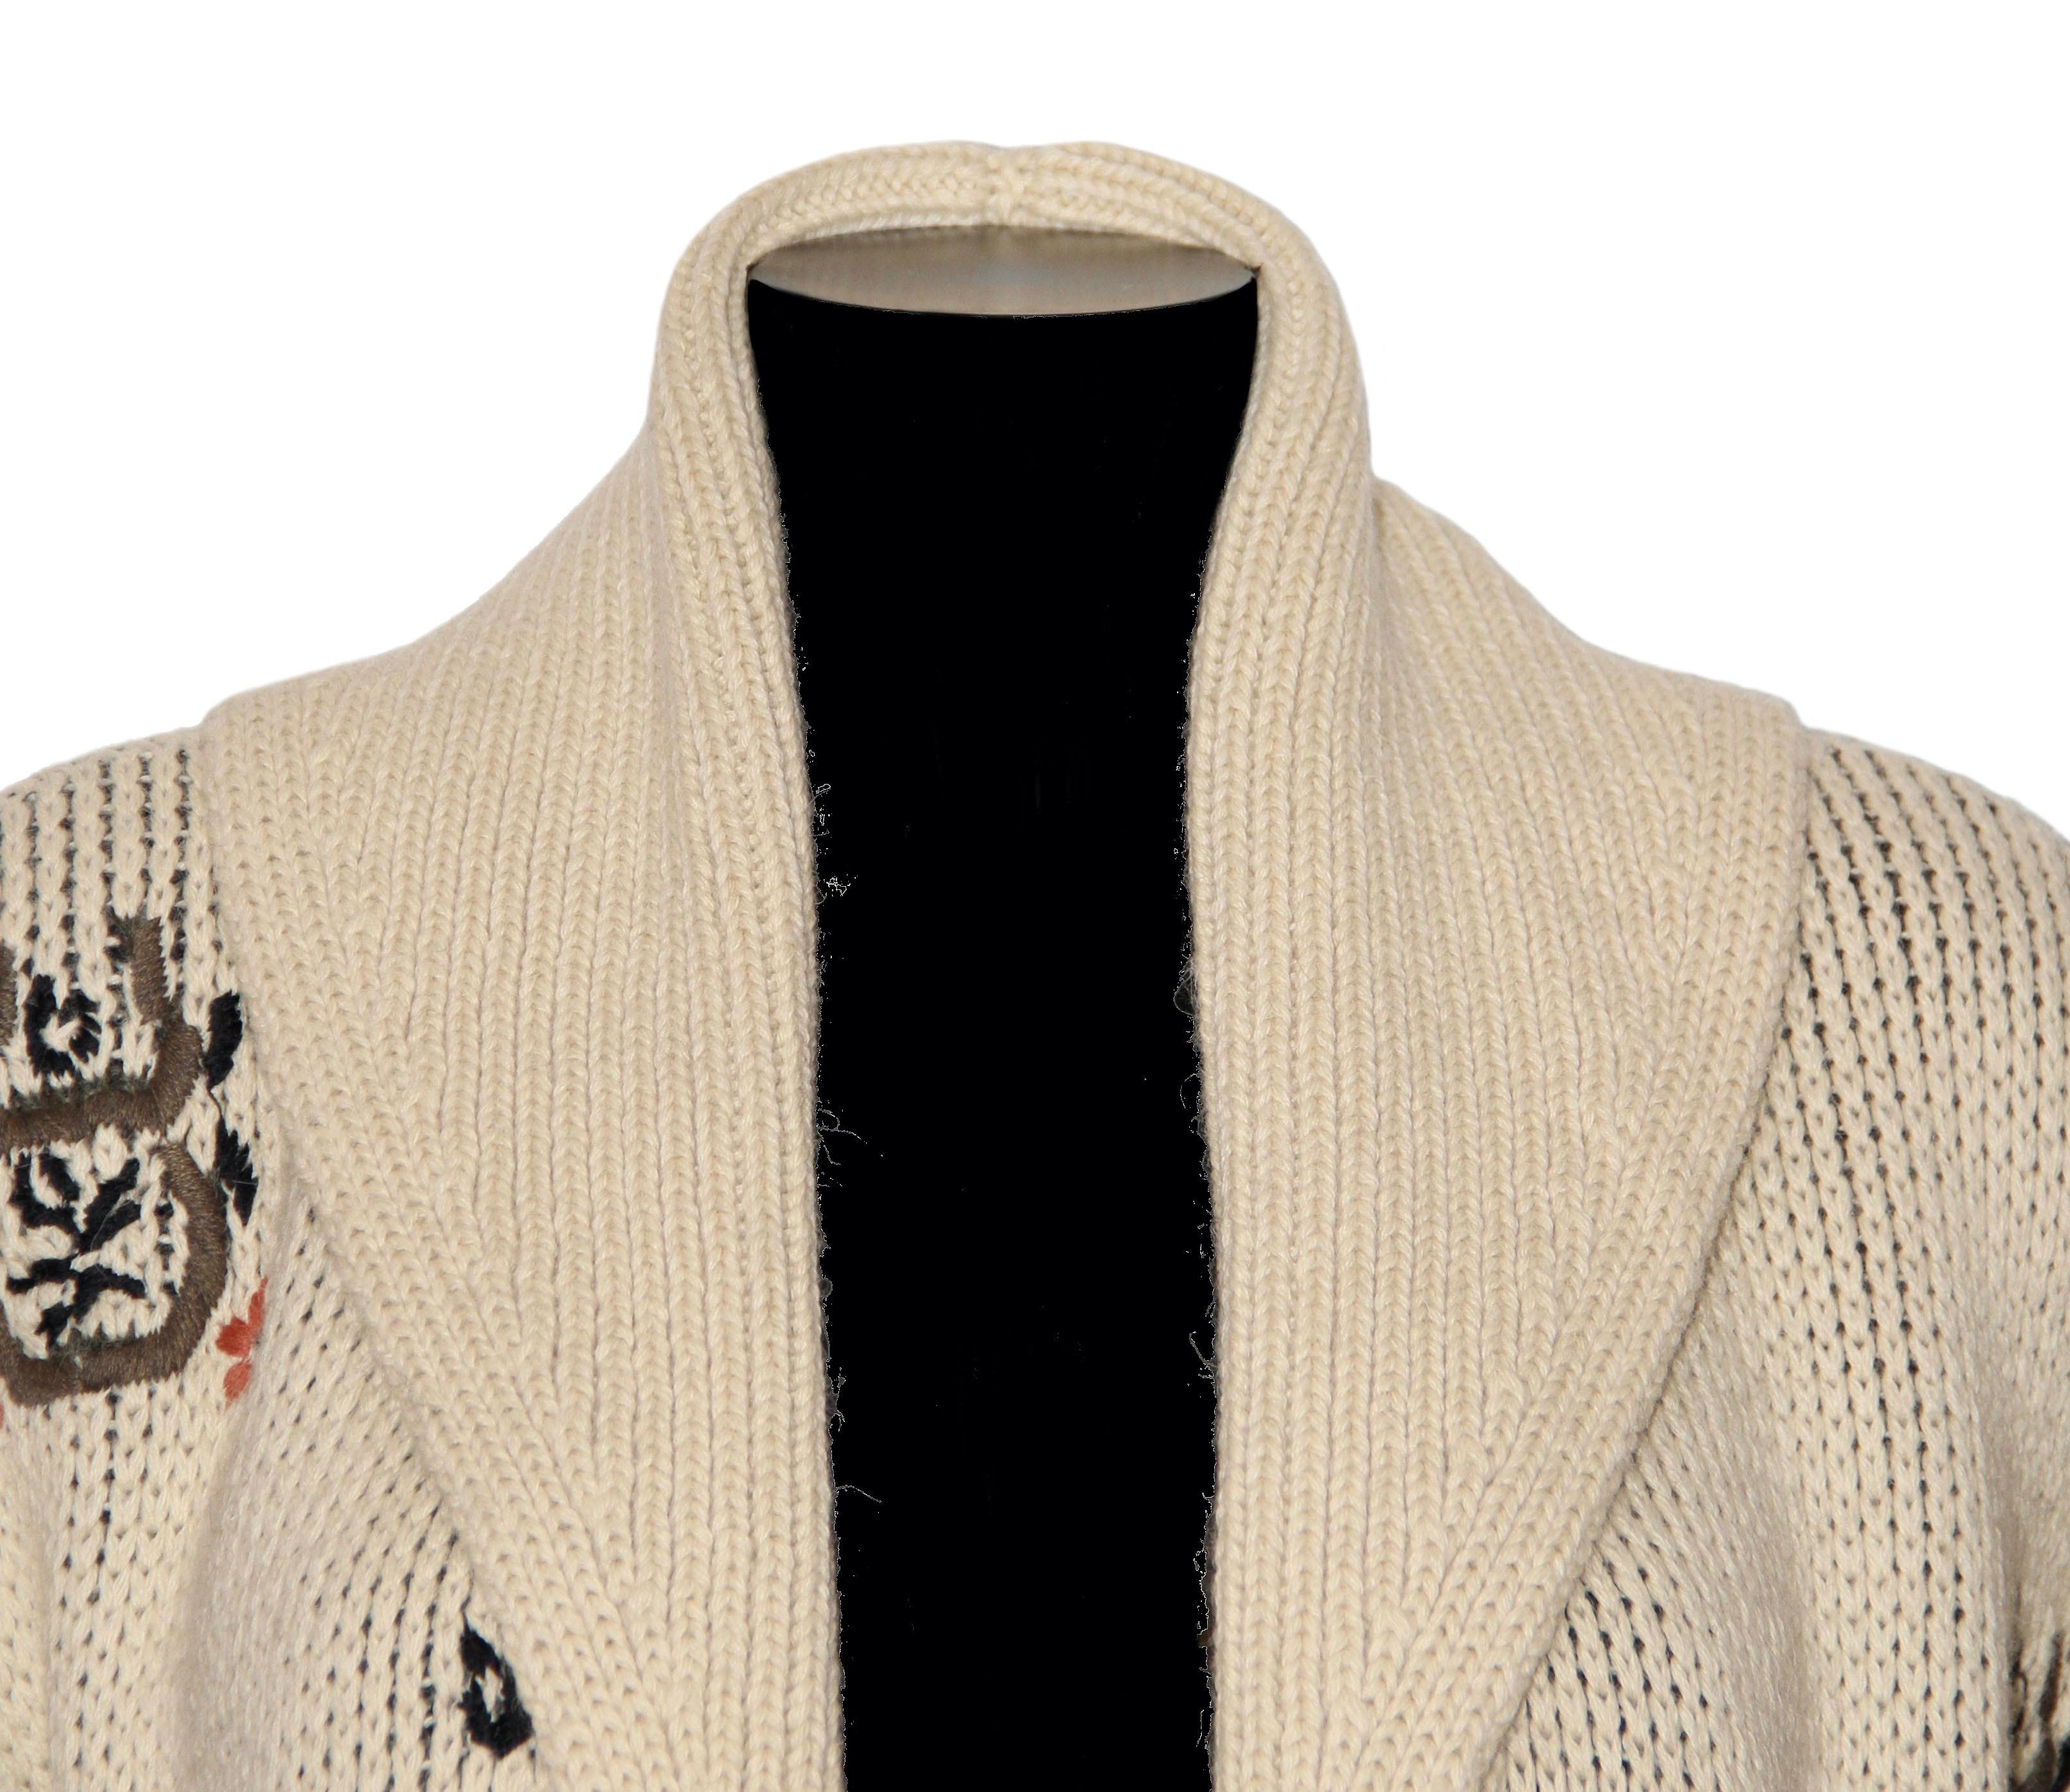 This new pre-owned oversized knit wrap cardigan from the house of Christian Dior is realized in a soft virgin wool / alpaka knit.
It features a shawl collar in a rib finish all the way down to the front with a matching self-tie belt.
Its design is